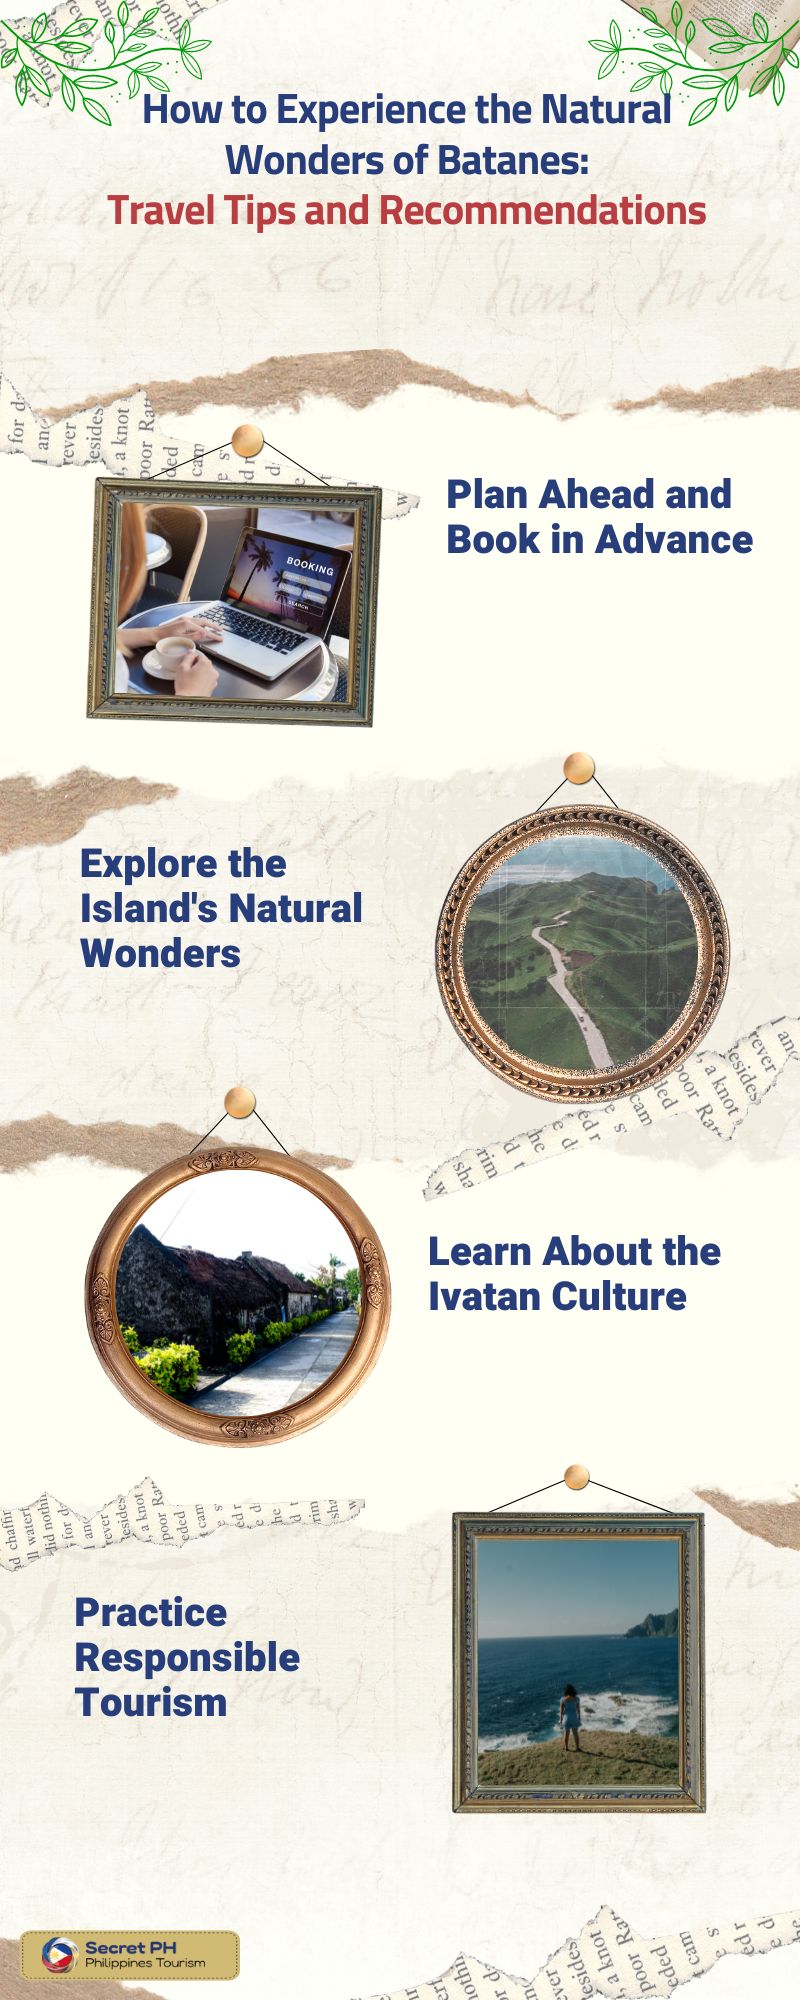 How to Experience the Natural Wonders of Batanes Travel Tips and Recommendations